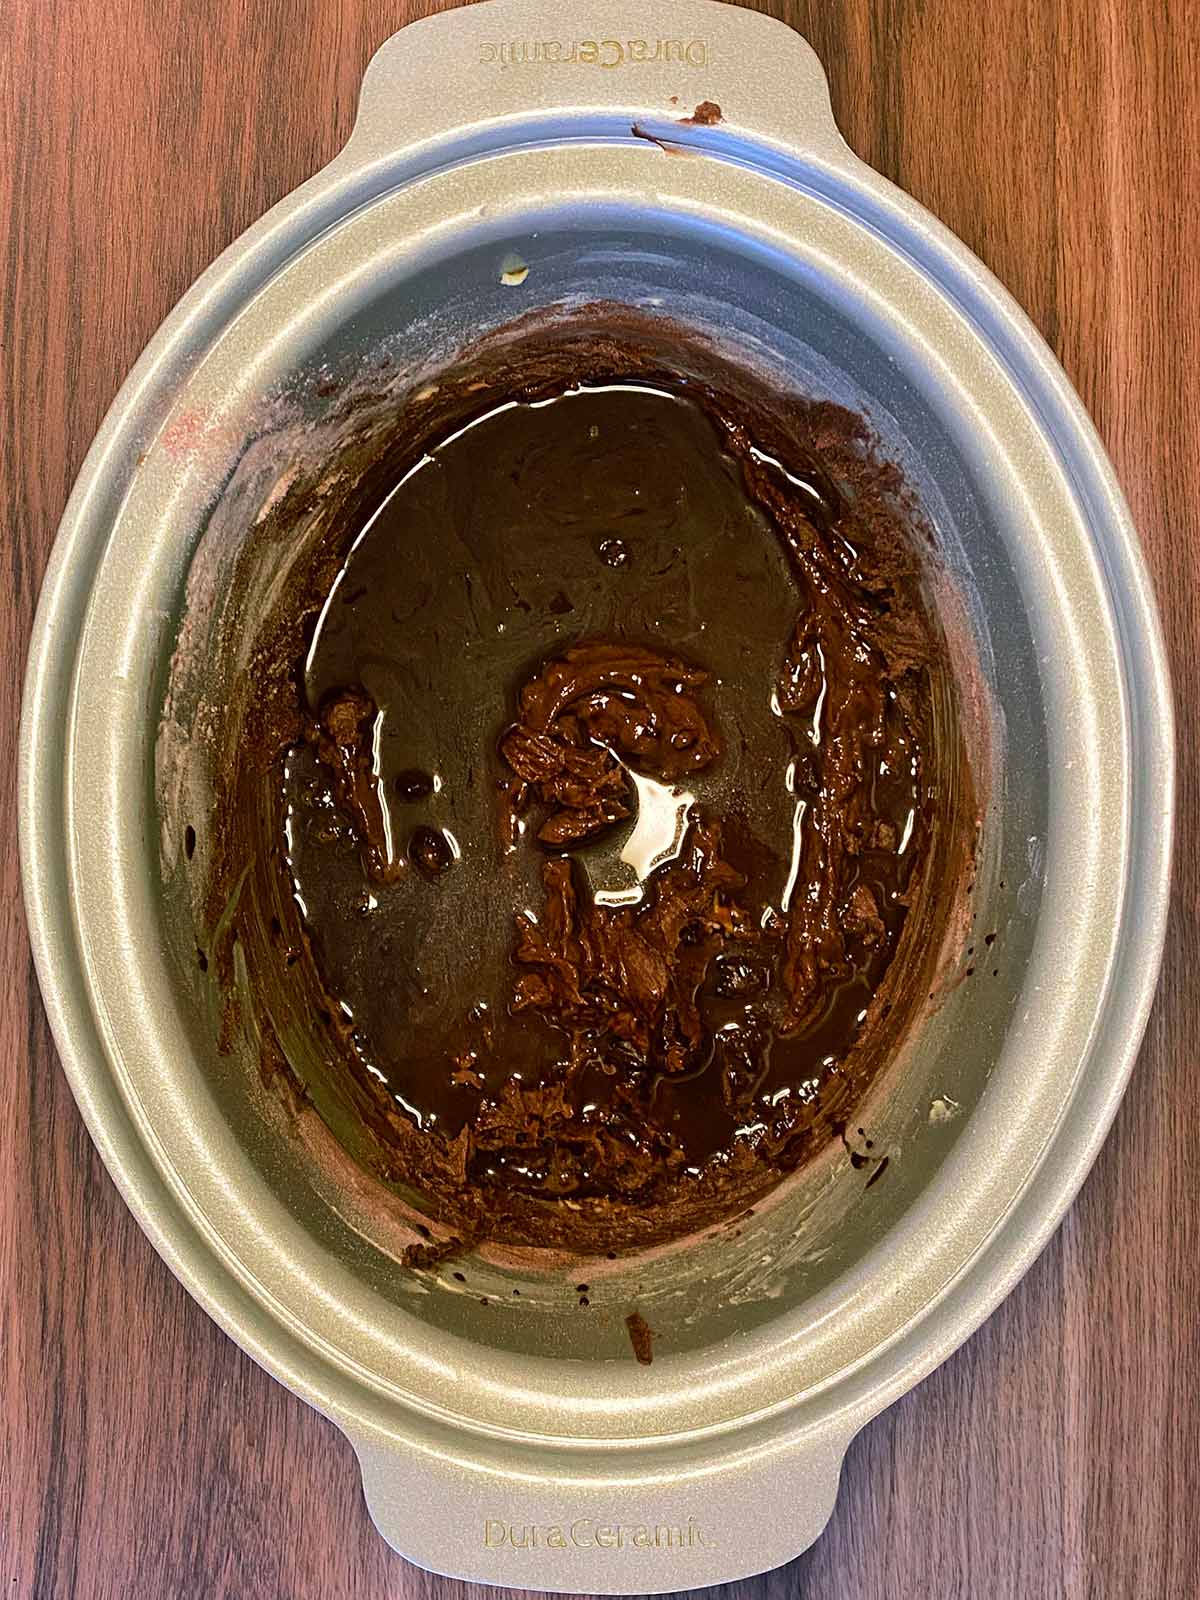 Chocolate sauce poured over the cake batter.